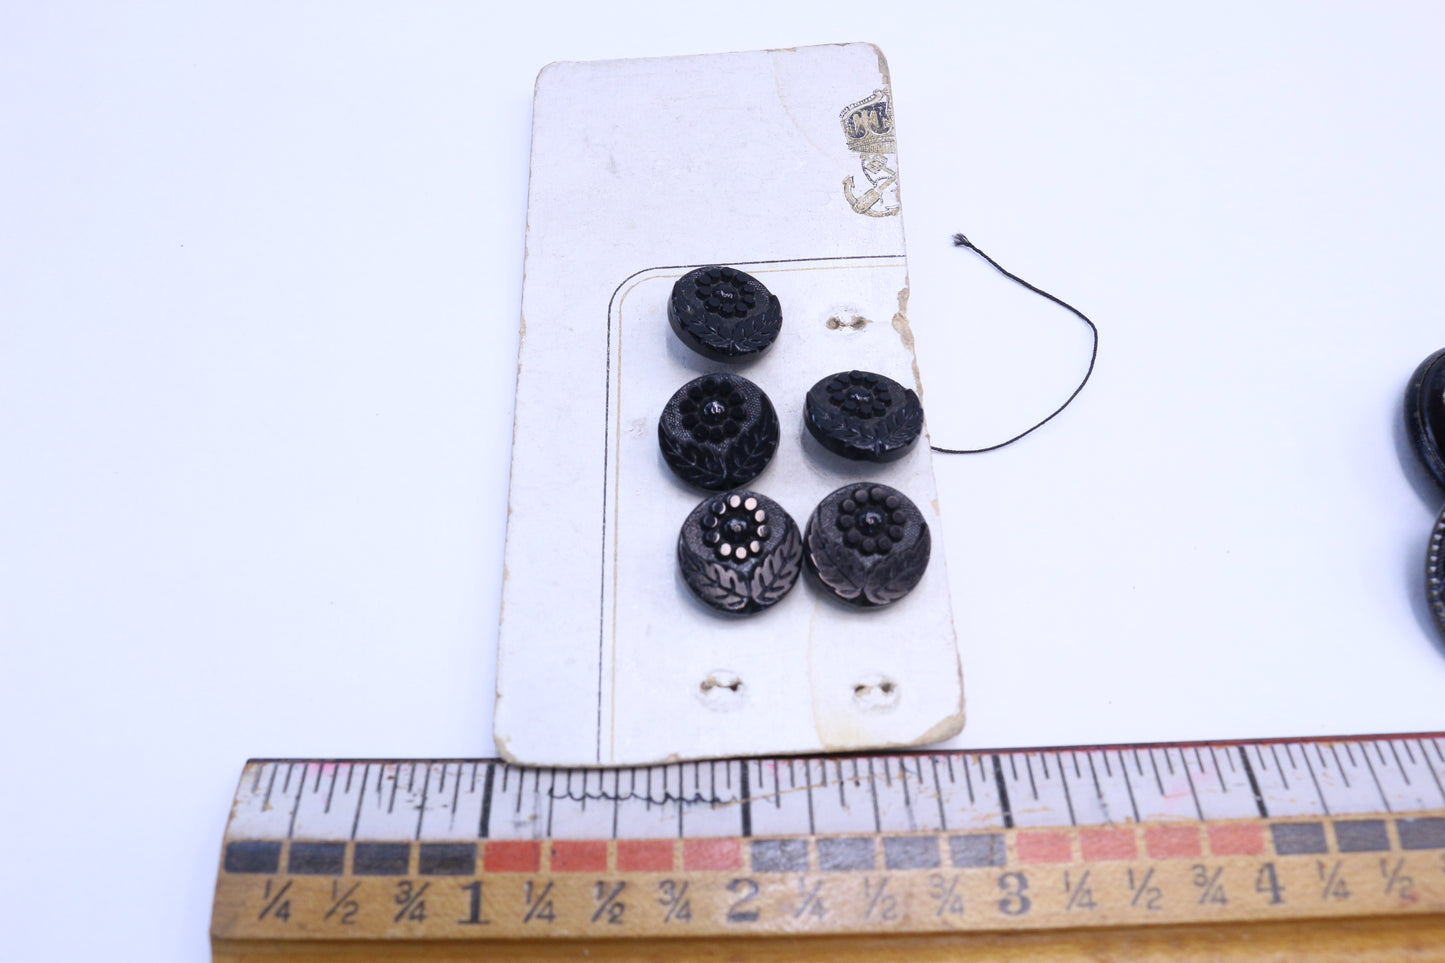 Vintage Black Flower Buttons or Stitched Flower Buttons